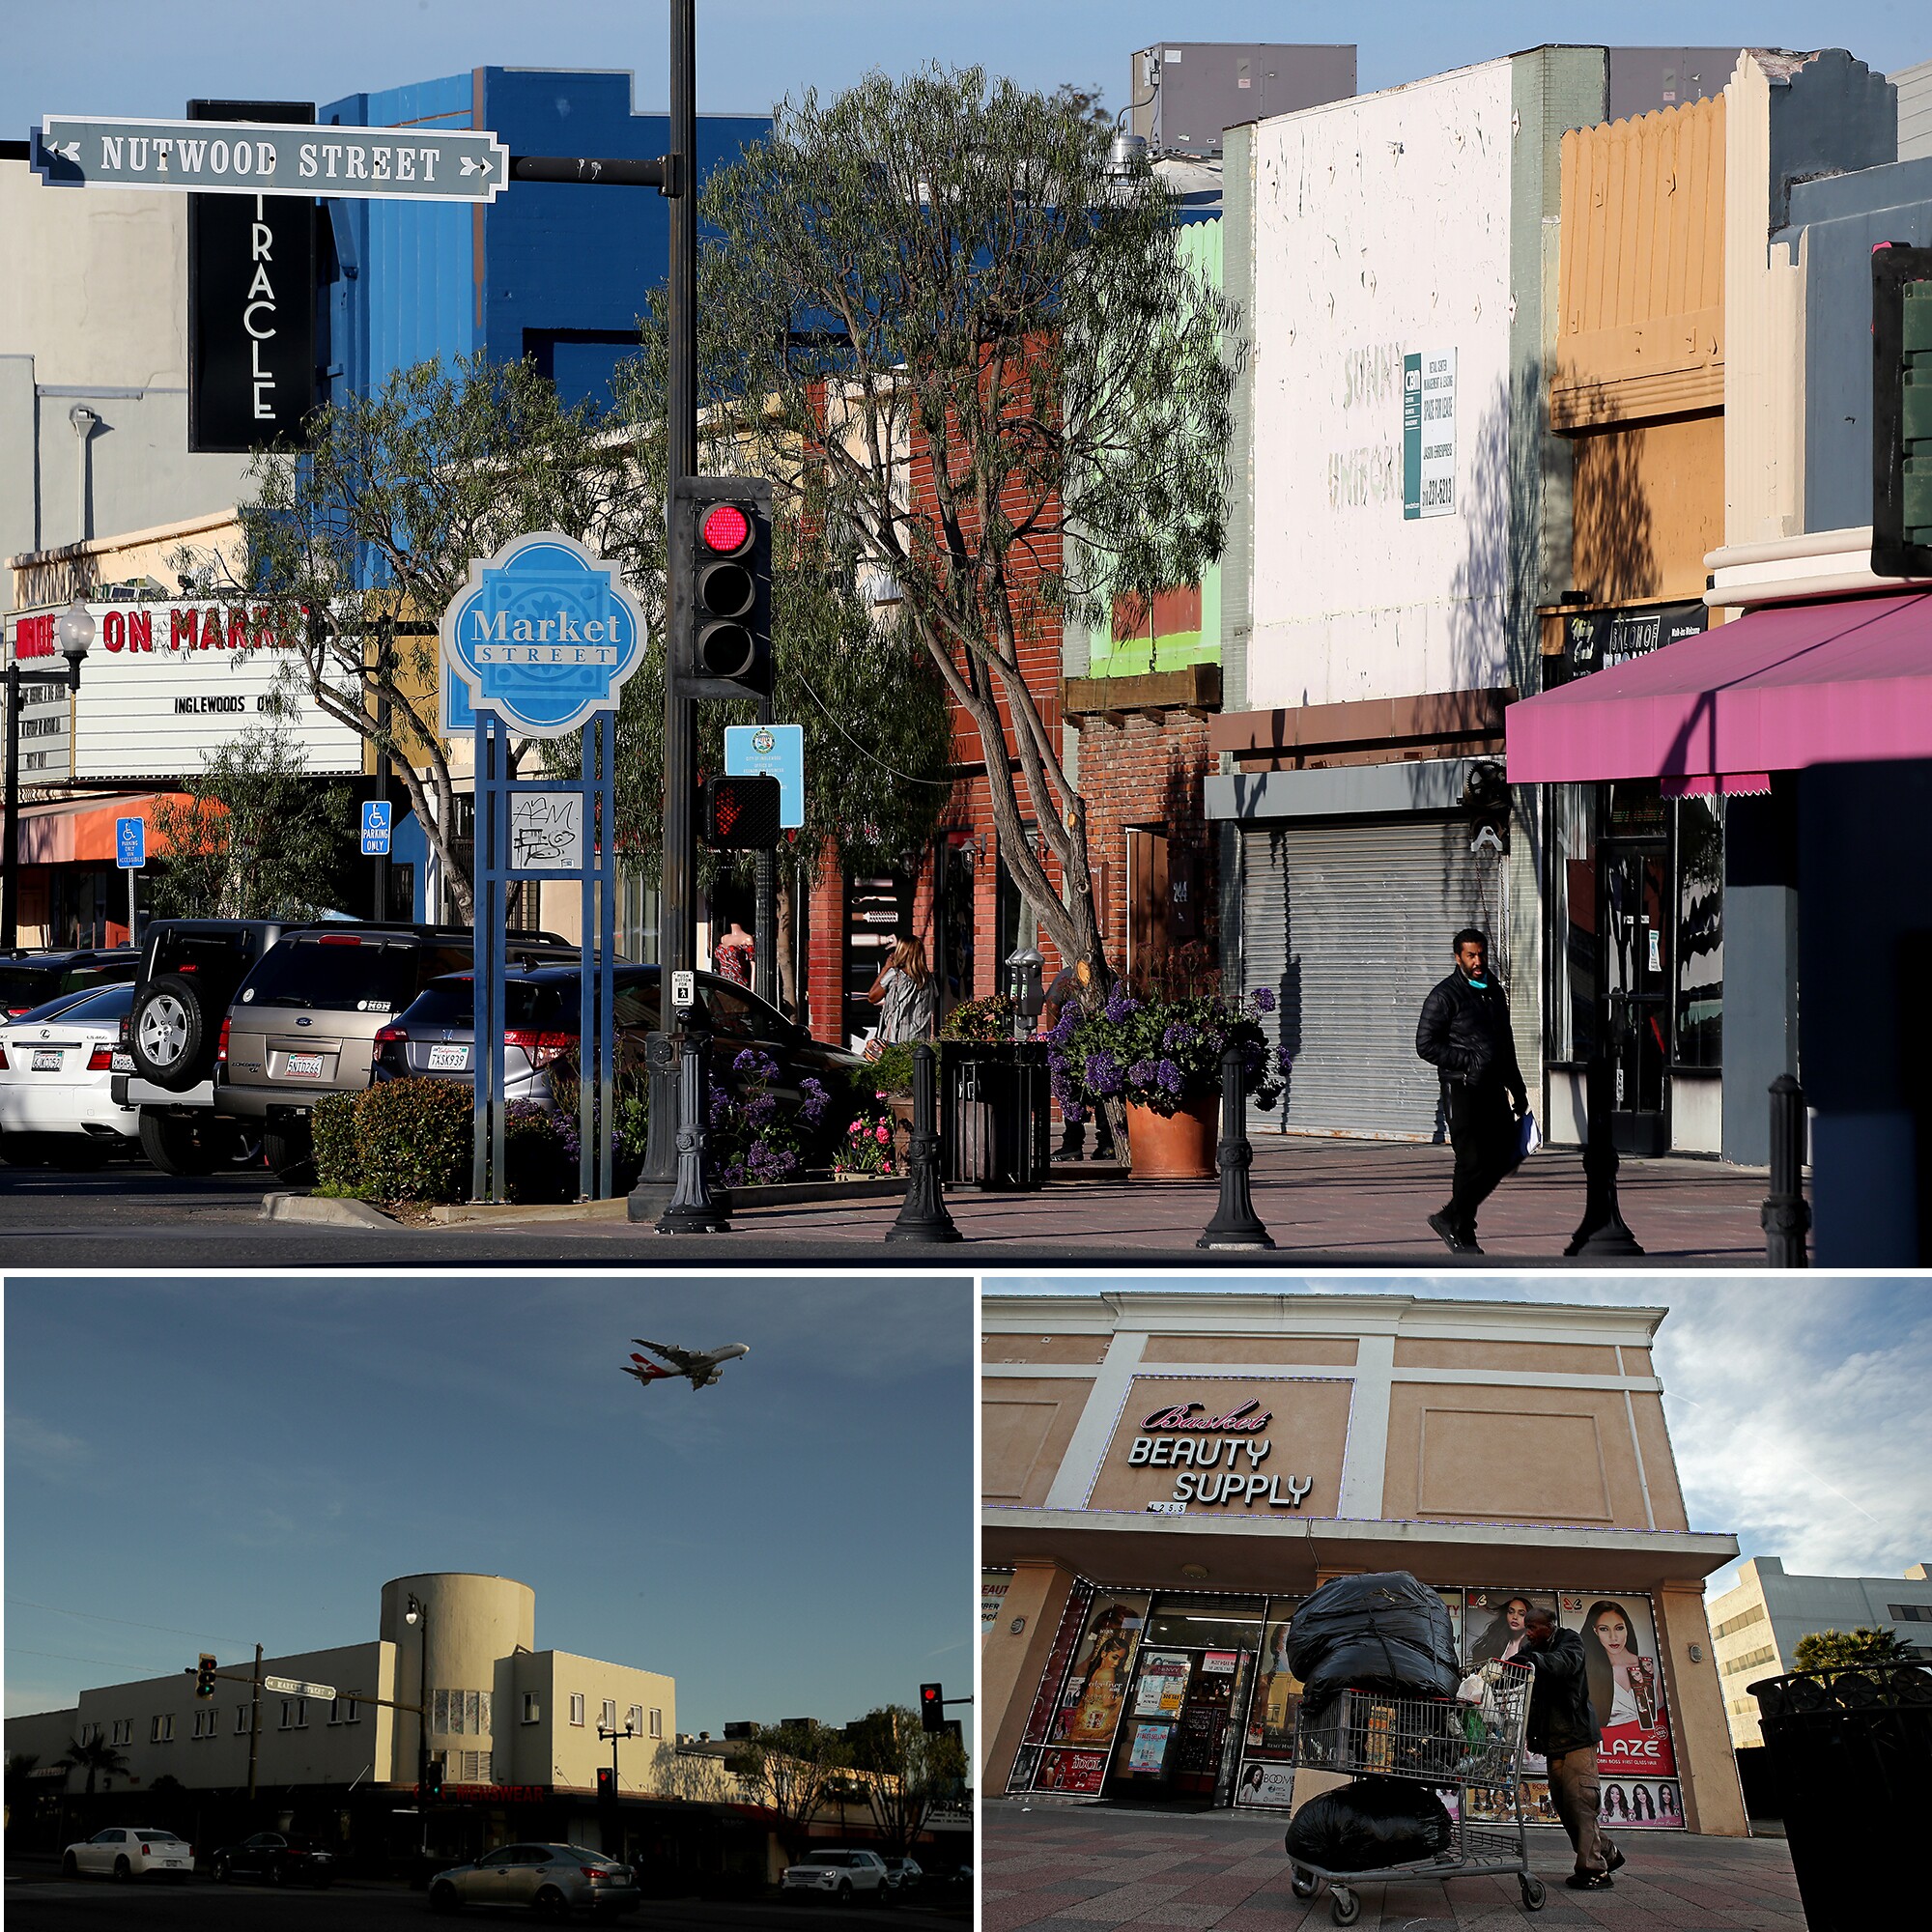 Scenes from Inglewood: Market Street, a plane heading to LAX, a man with a shopping cart